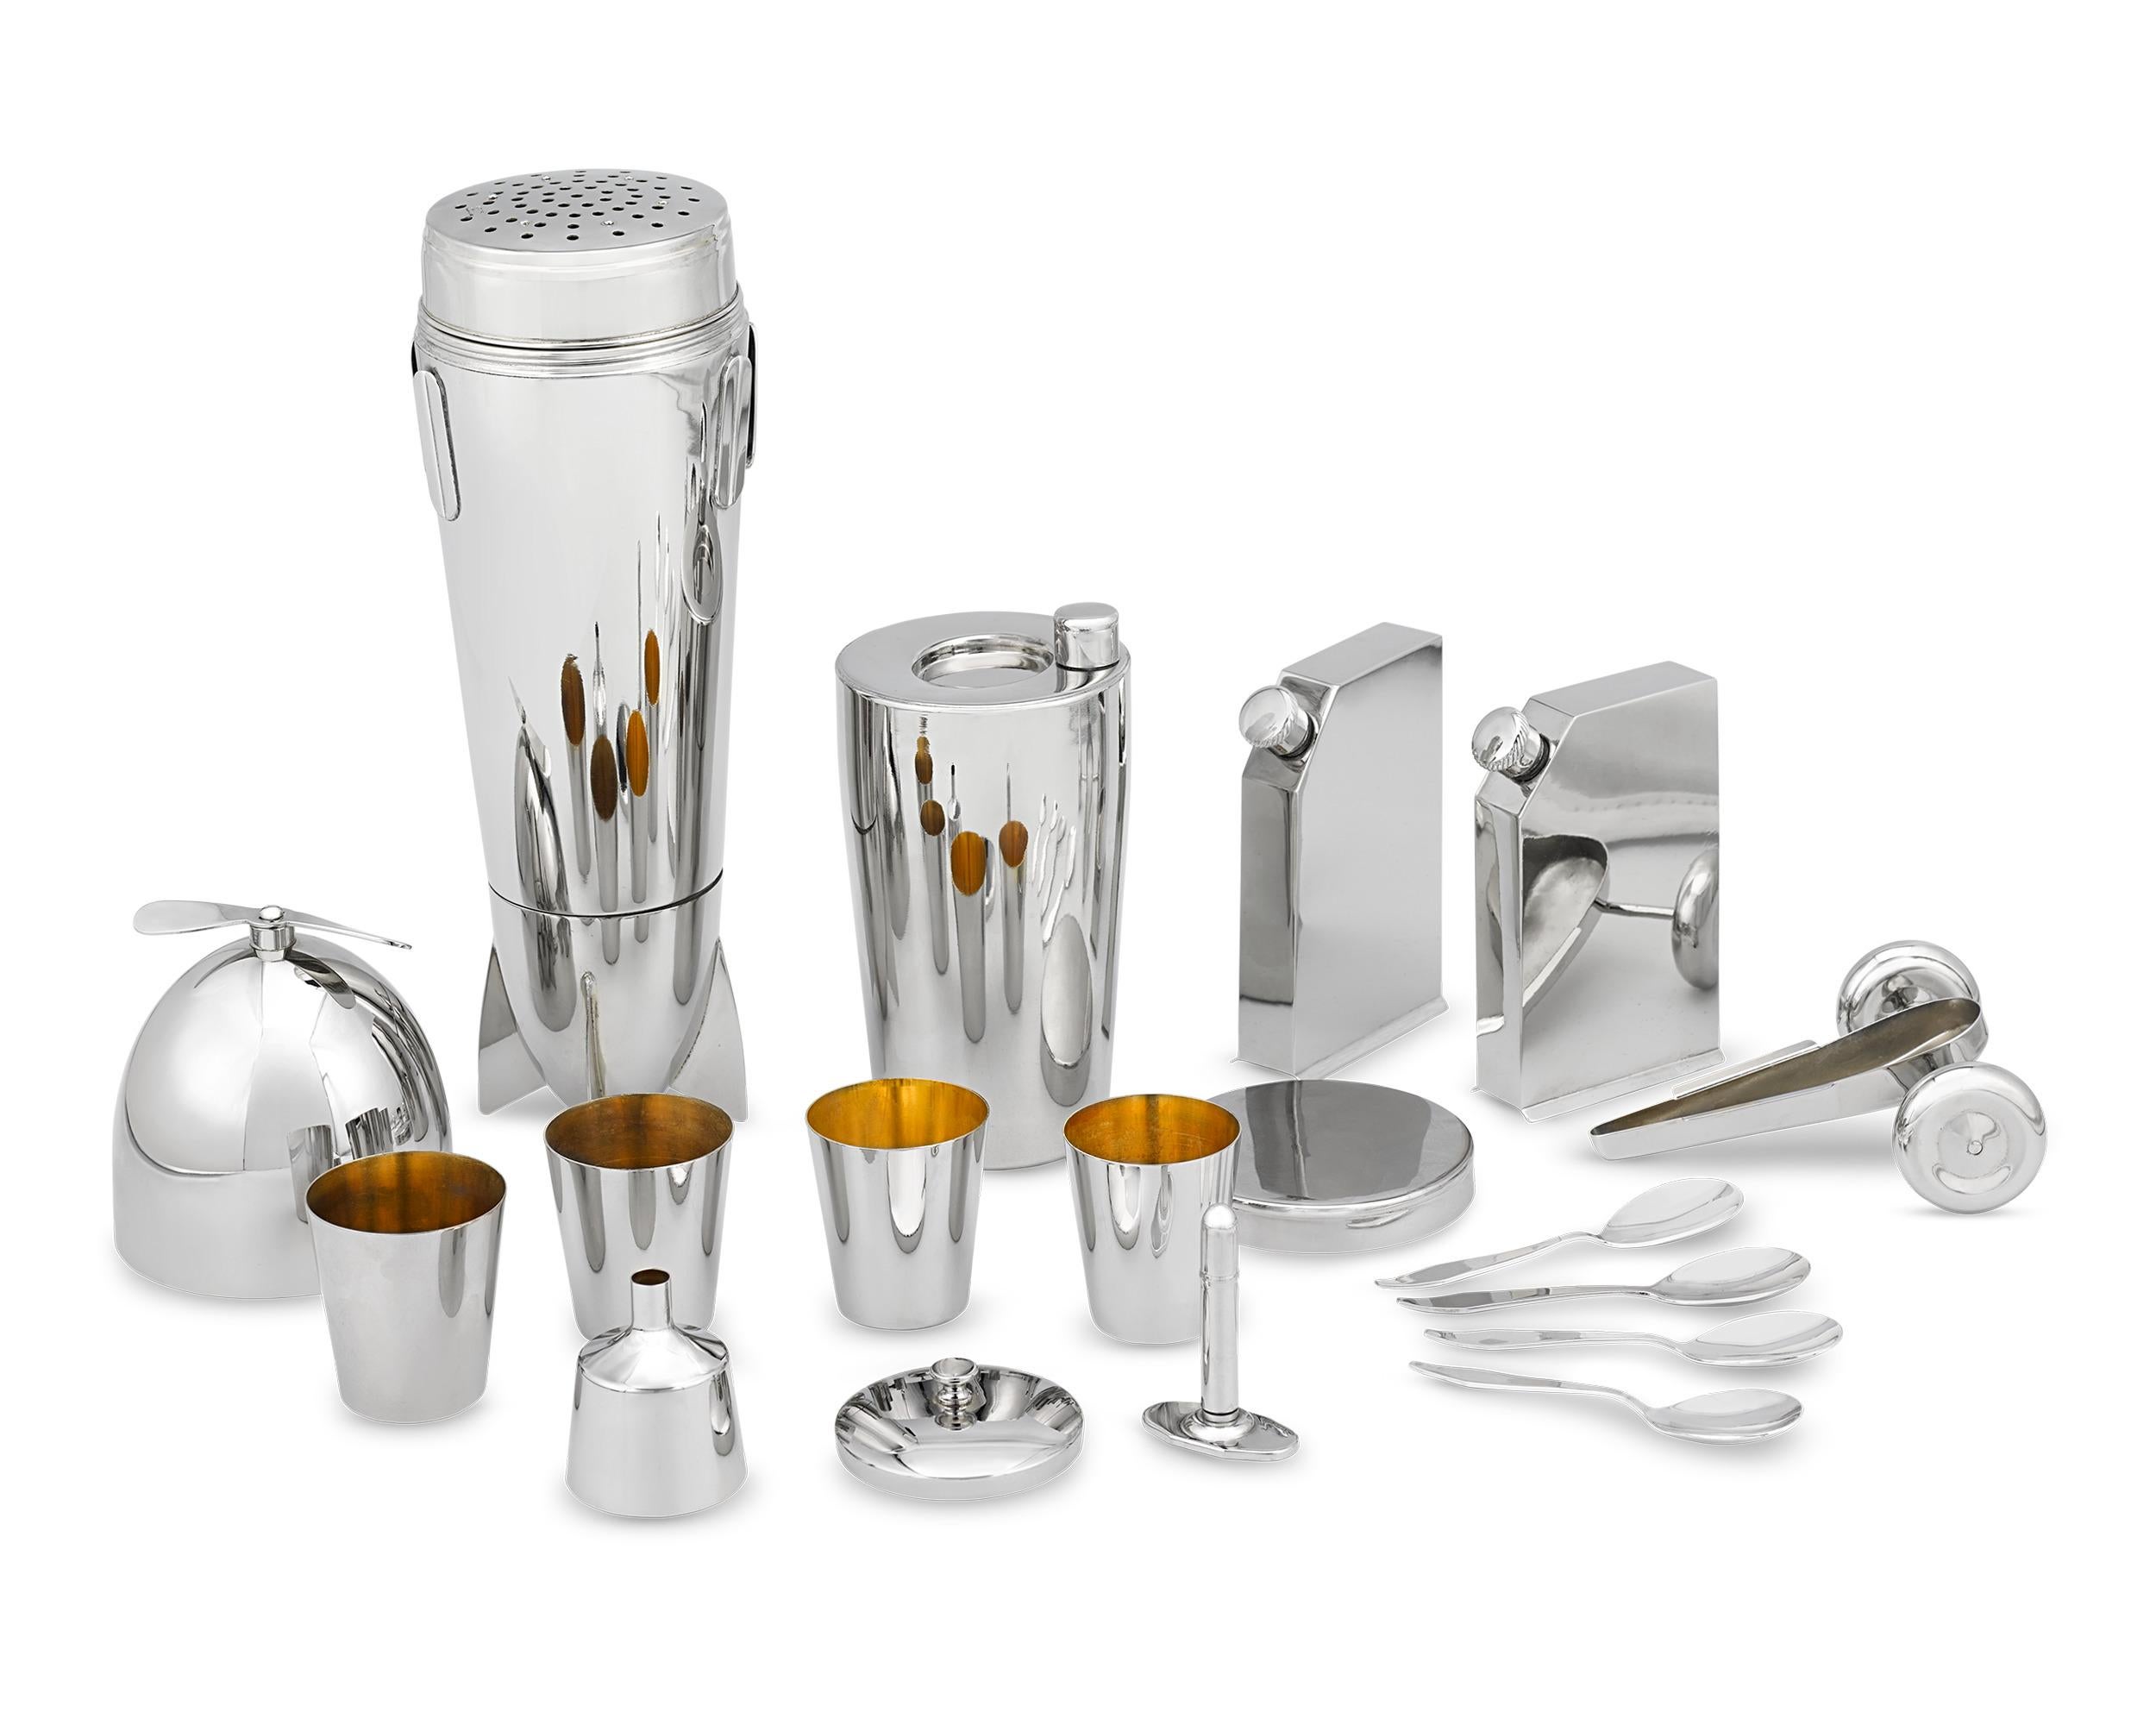 Crafted in 1928, this striking silver-plated cocktail shaker set by J.A. Henckels features two detachable flasks at the wings. Designed with burgeoning aviation in mind, this traveling airplane-shaped cocktail set includes all the necessary tools to